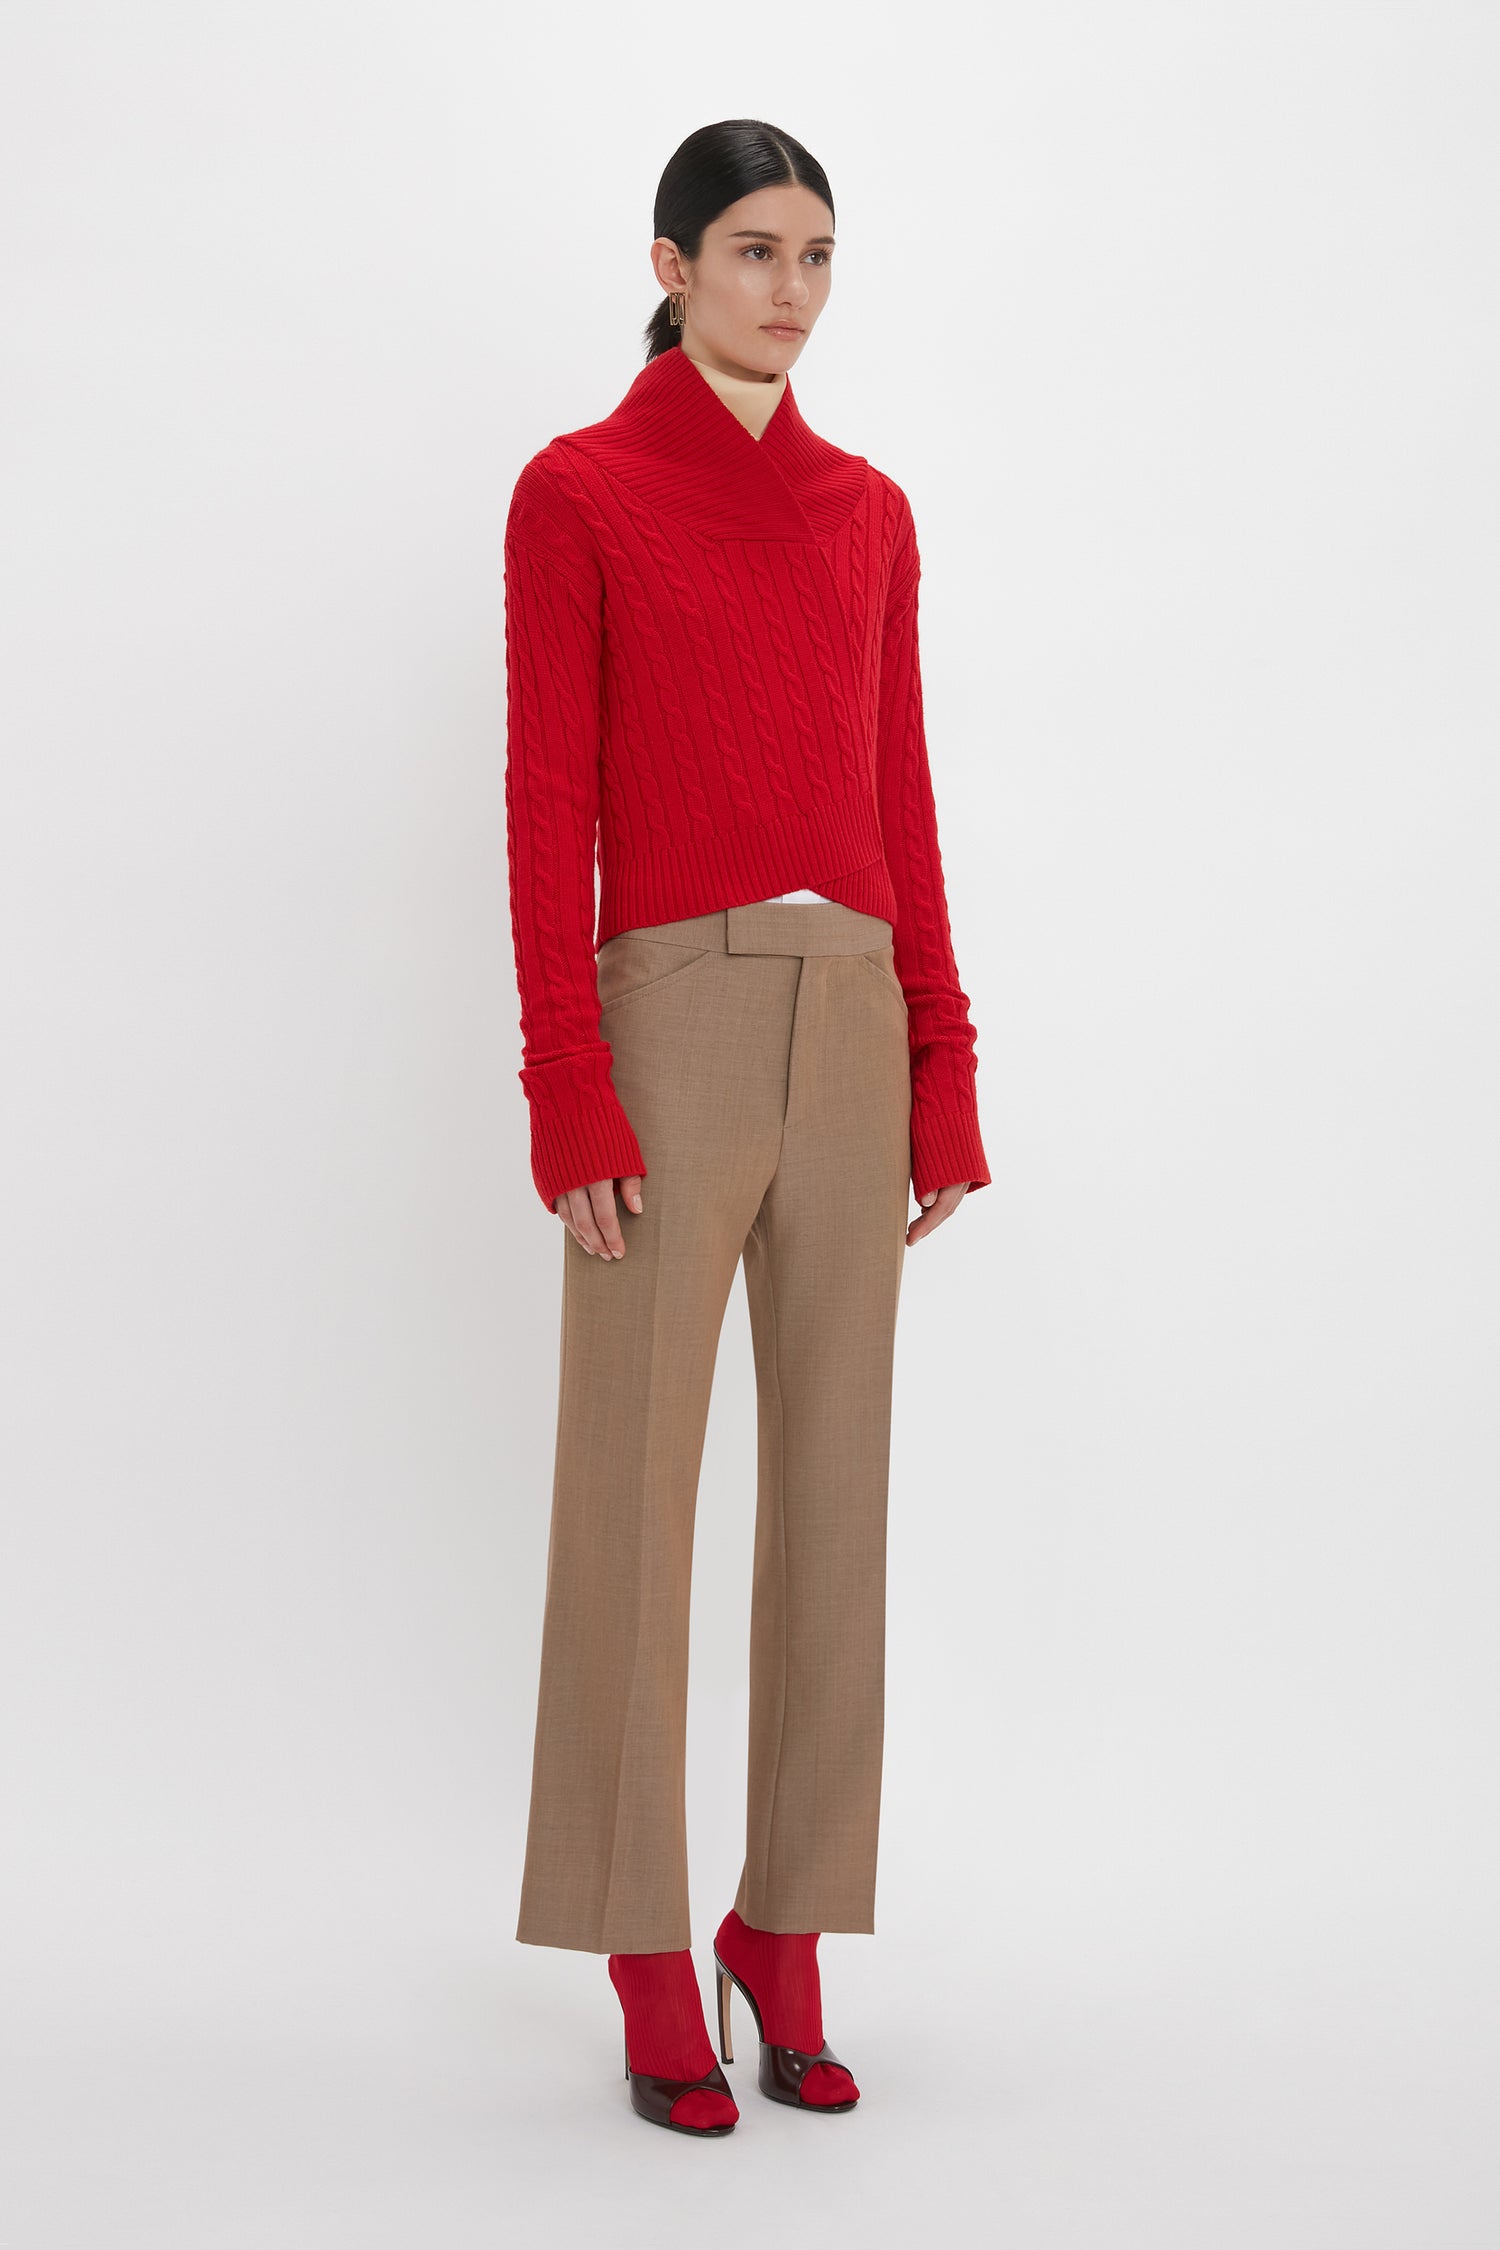 A person is wearing a luxurious red Wrap Detail Jumper In Red by Victoria Beckham, paired with light brown wide-legged trousers and red high-heeled shoes. They are standing against a plain white background.